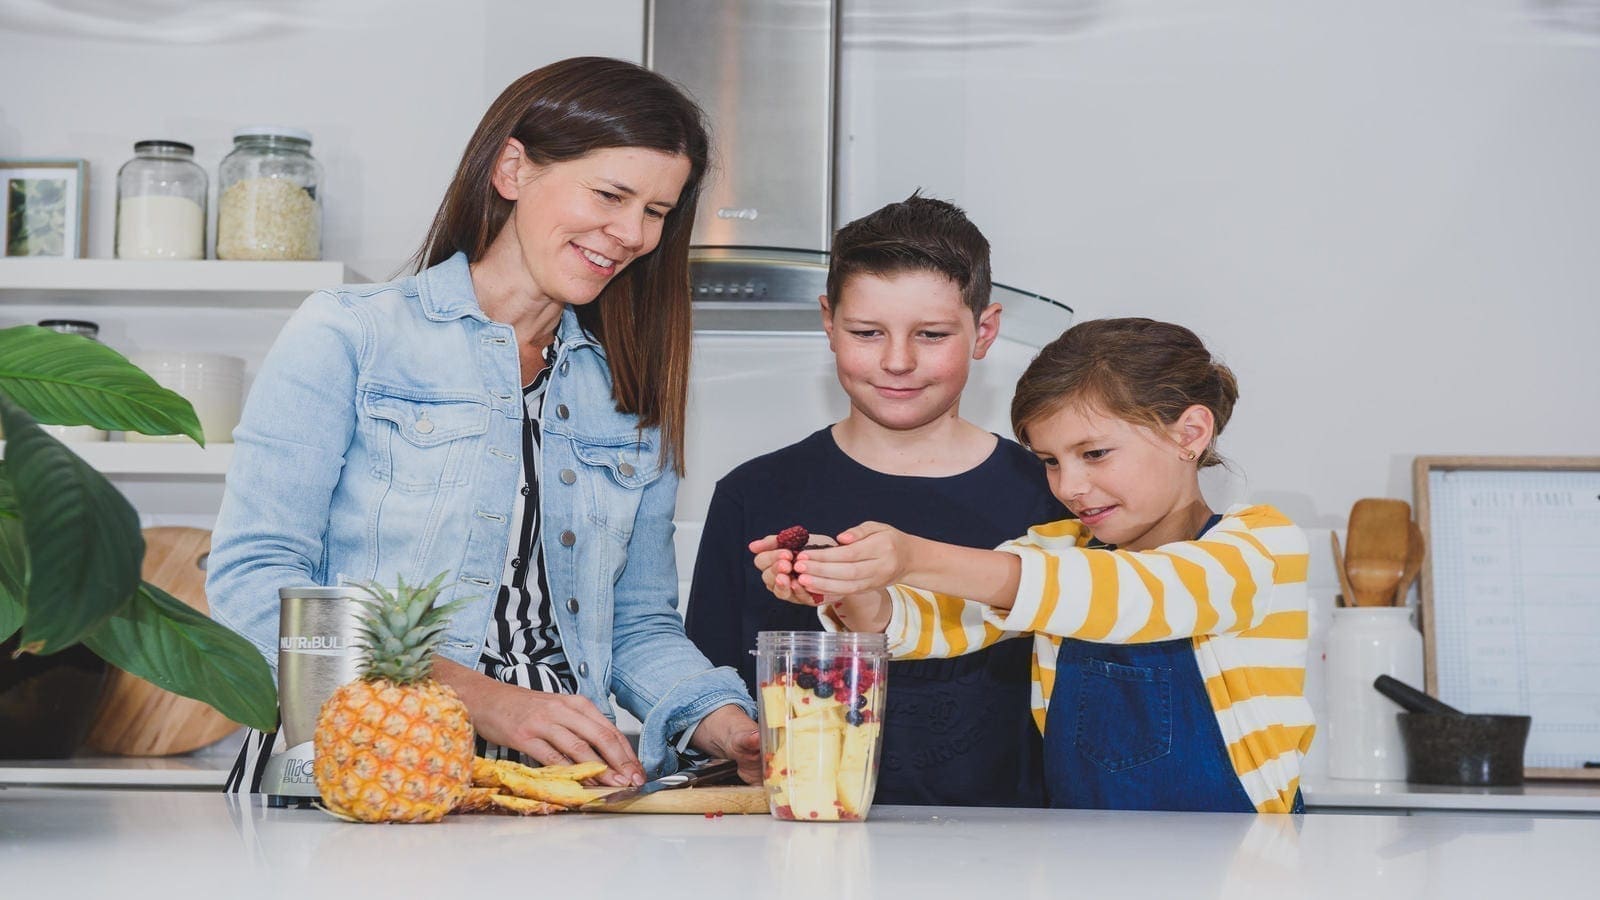 South African nutritious food maker The Harvest Table introduces new shake range for kids